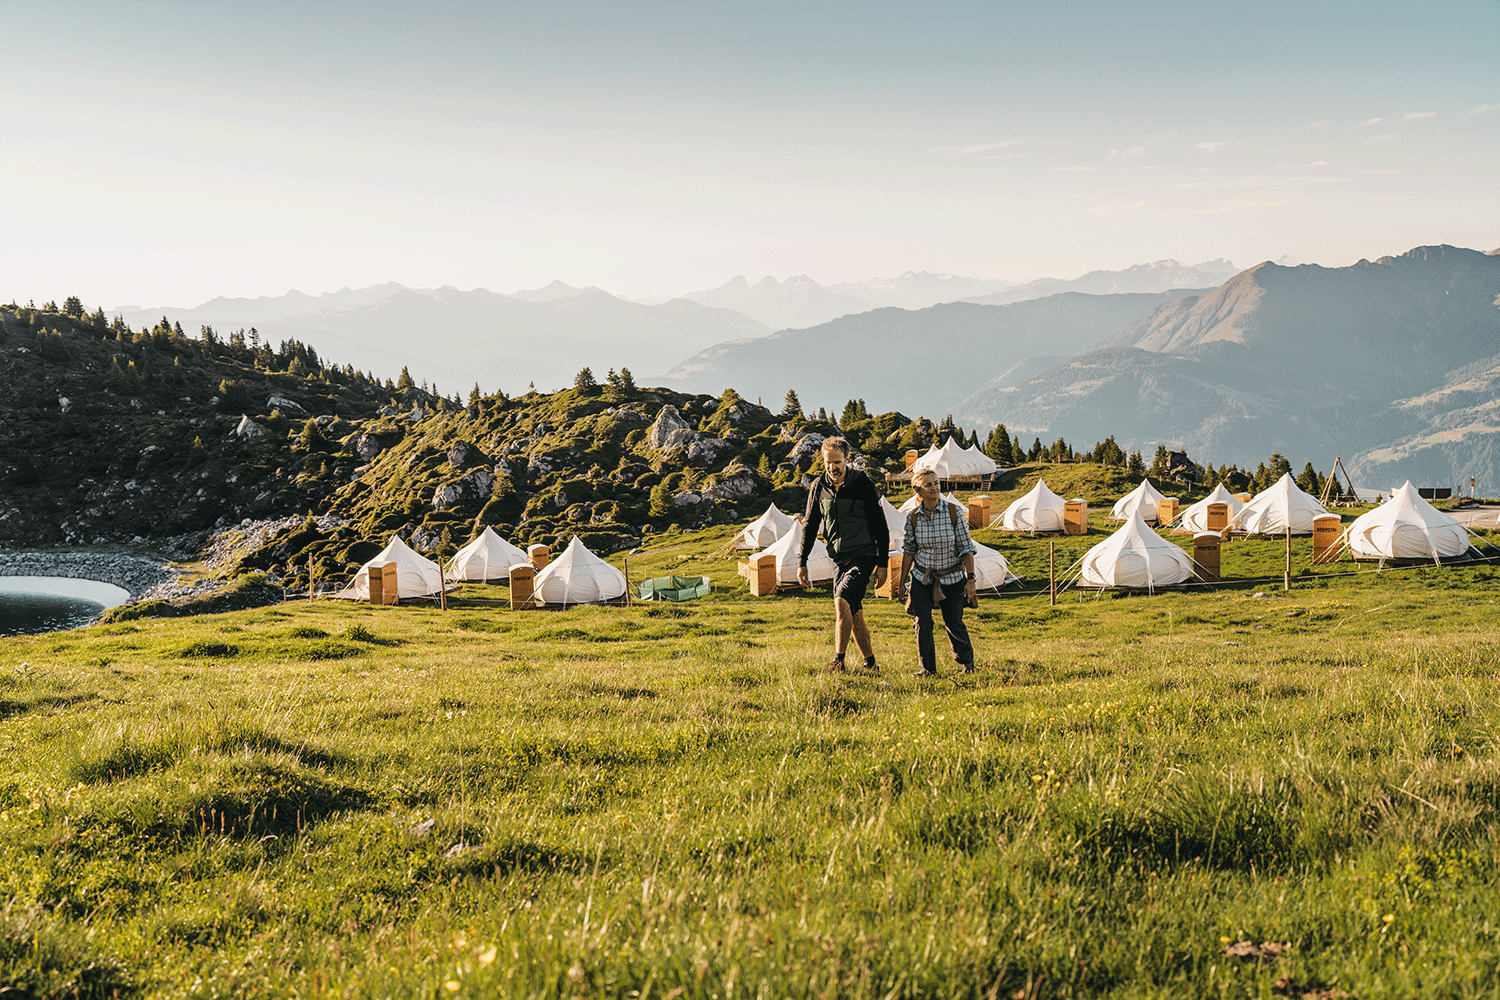 (c) Tcs-glamping.ch